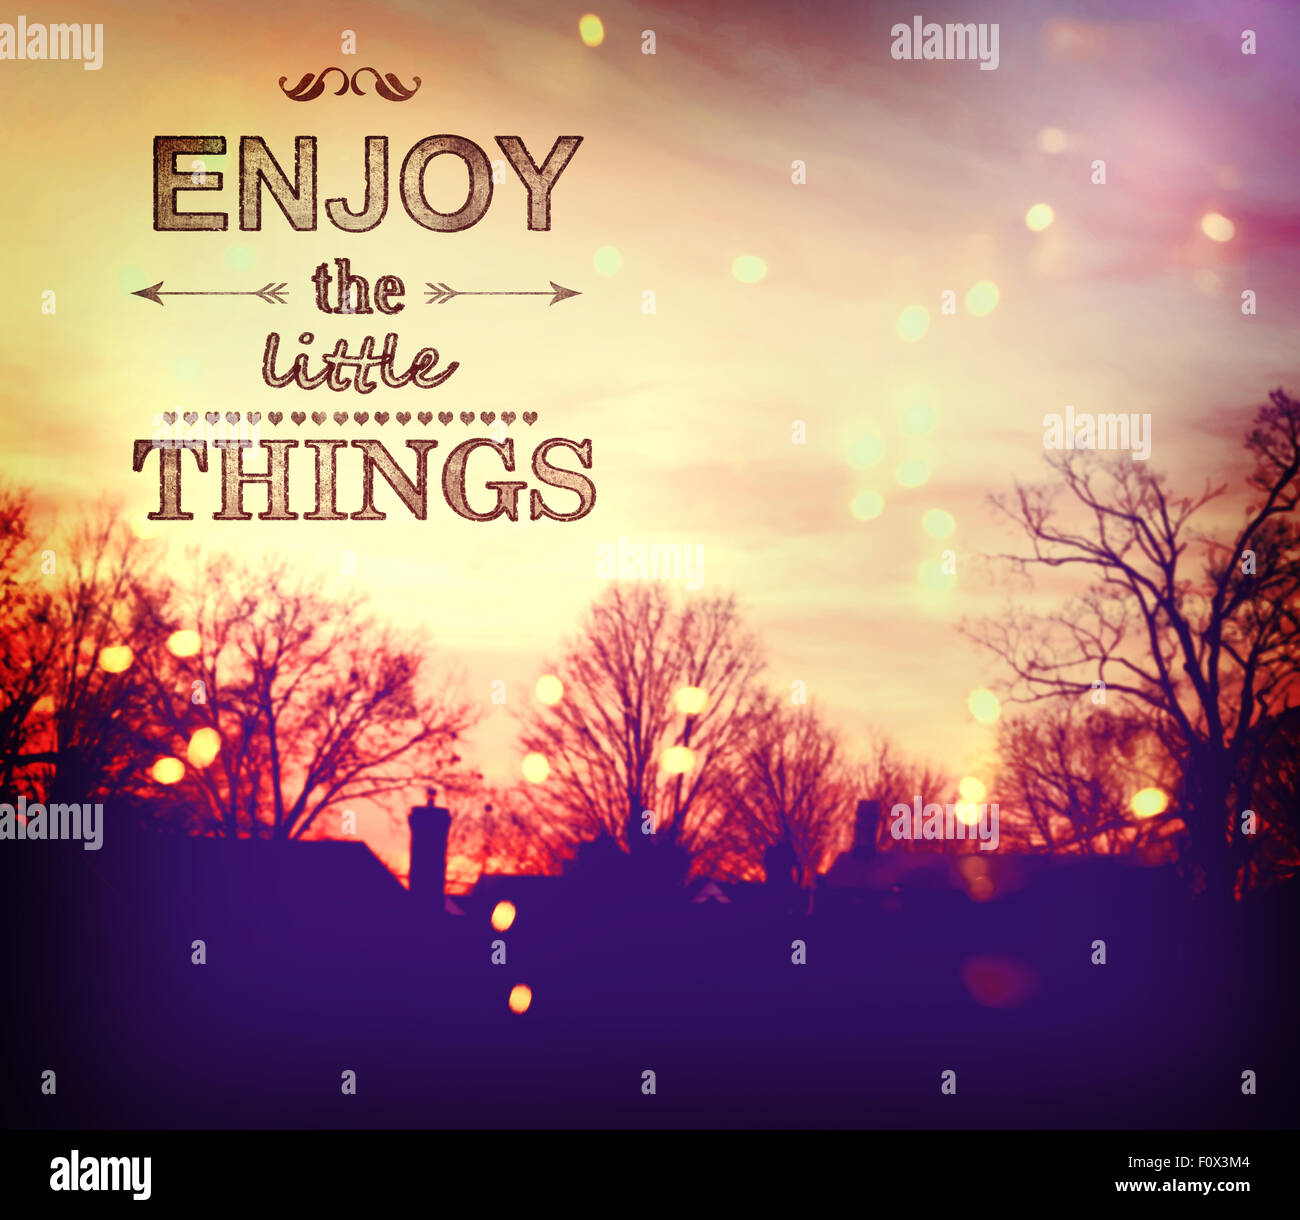 Enjoy the Little Things text on twilight background Stock Photo